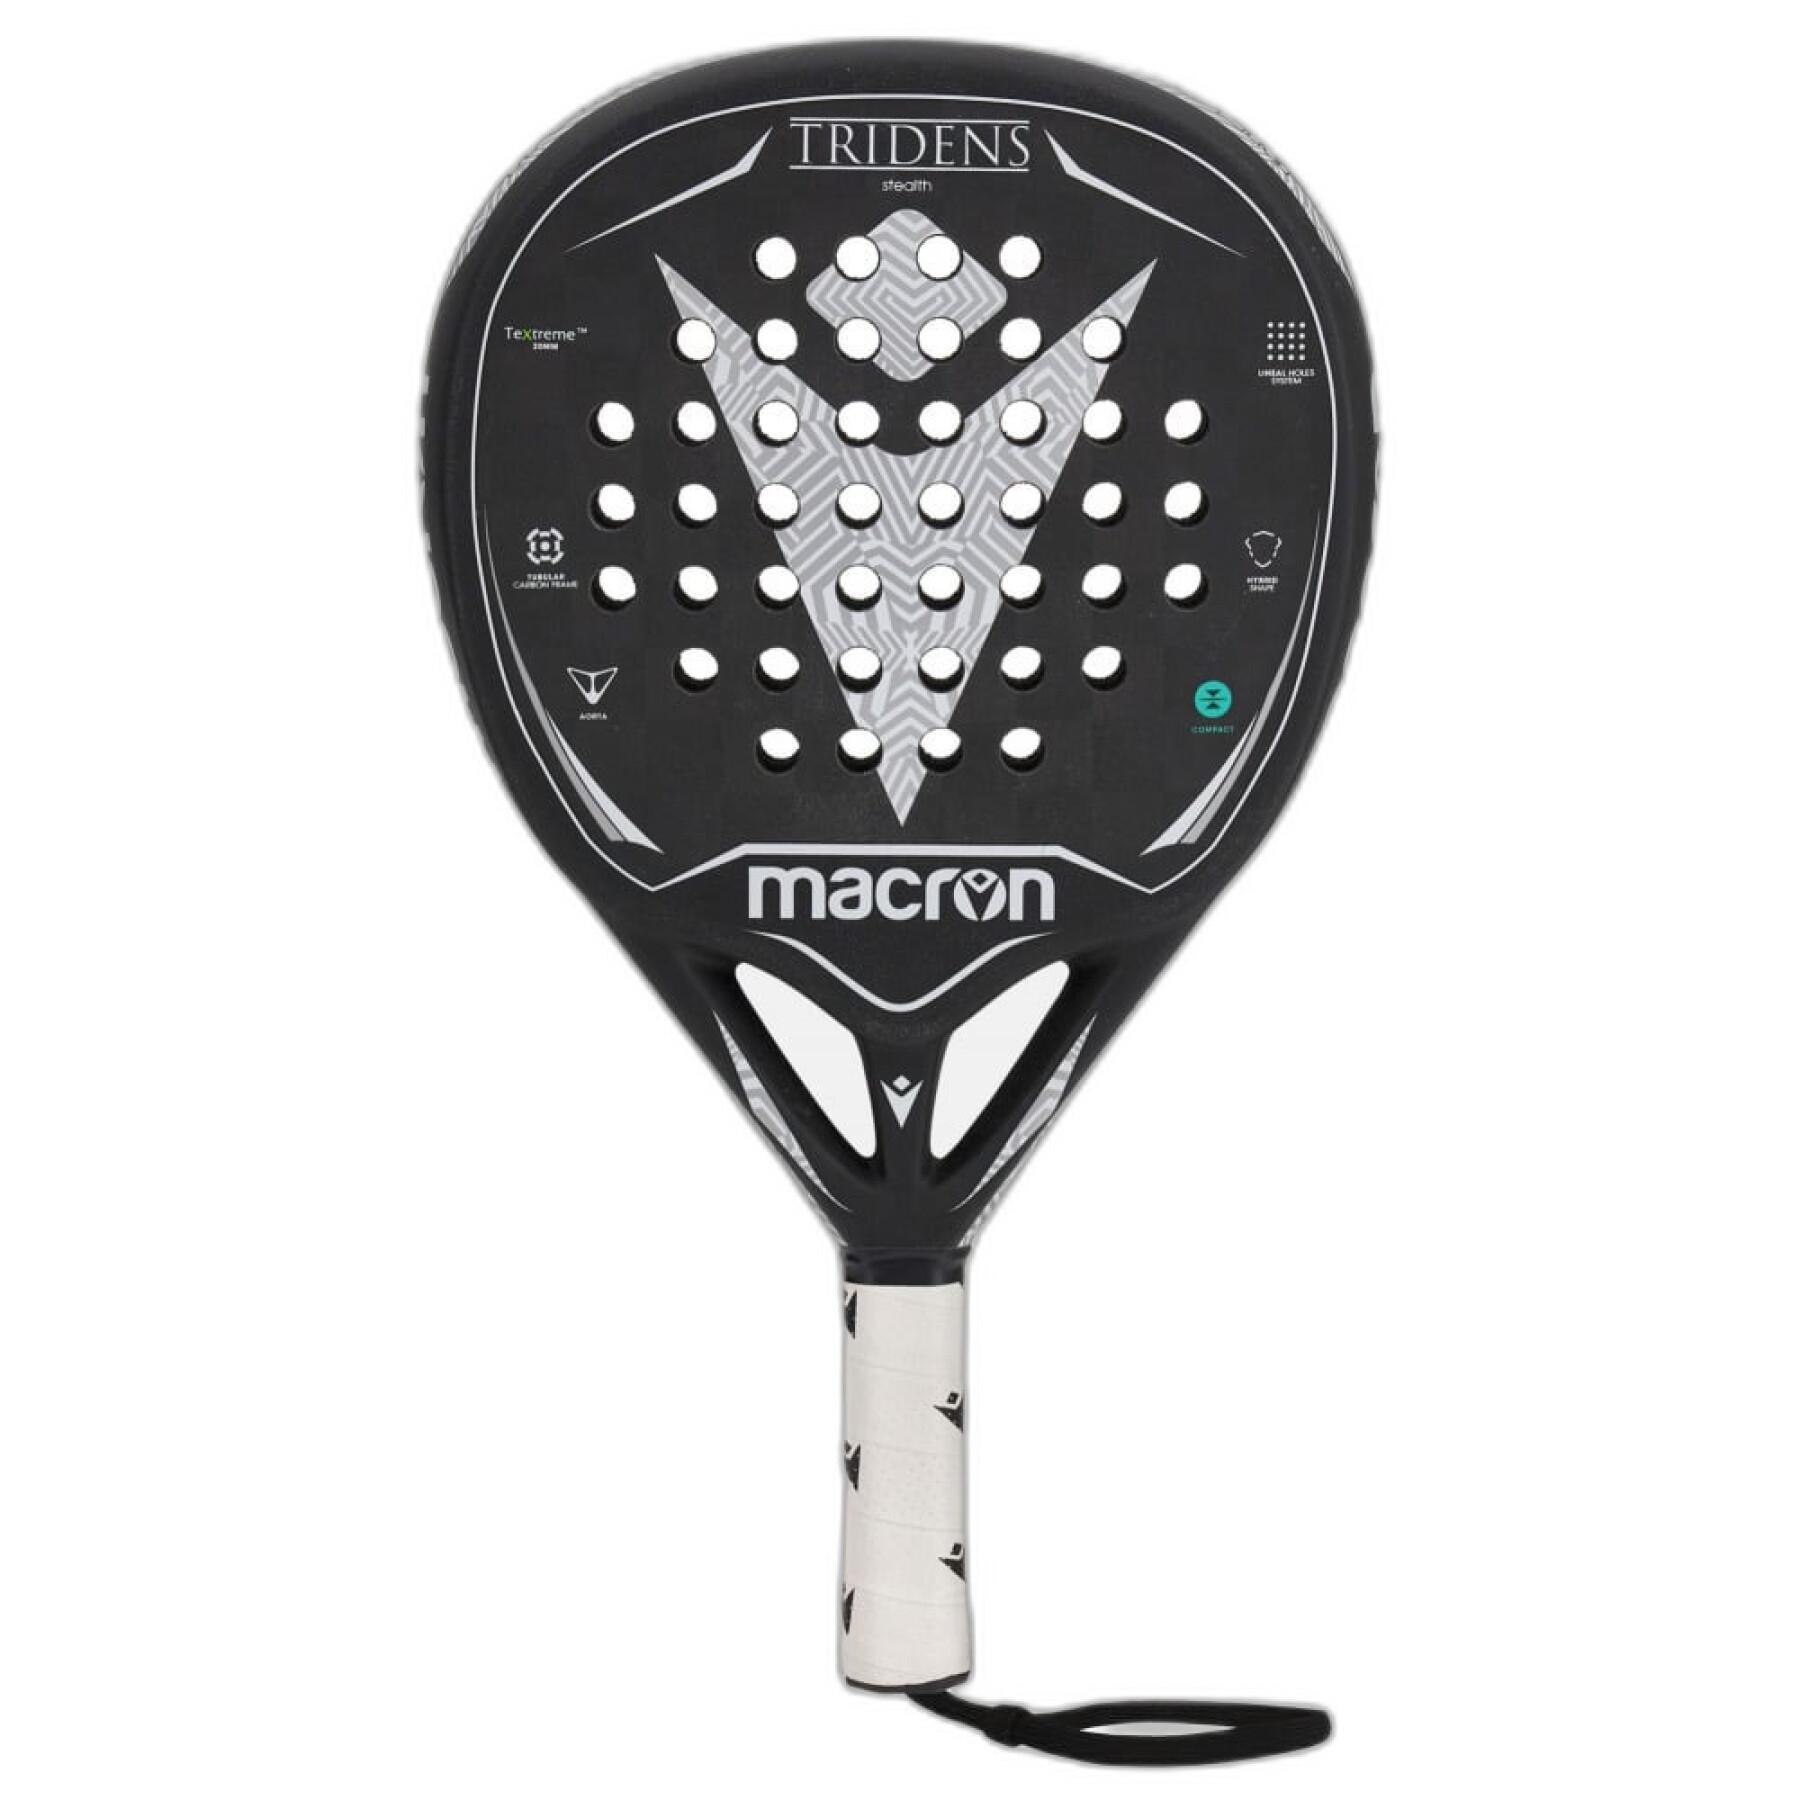 Racket from padel Macron Prime CC Tridens Stealth Pro